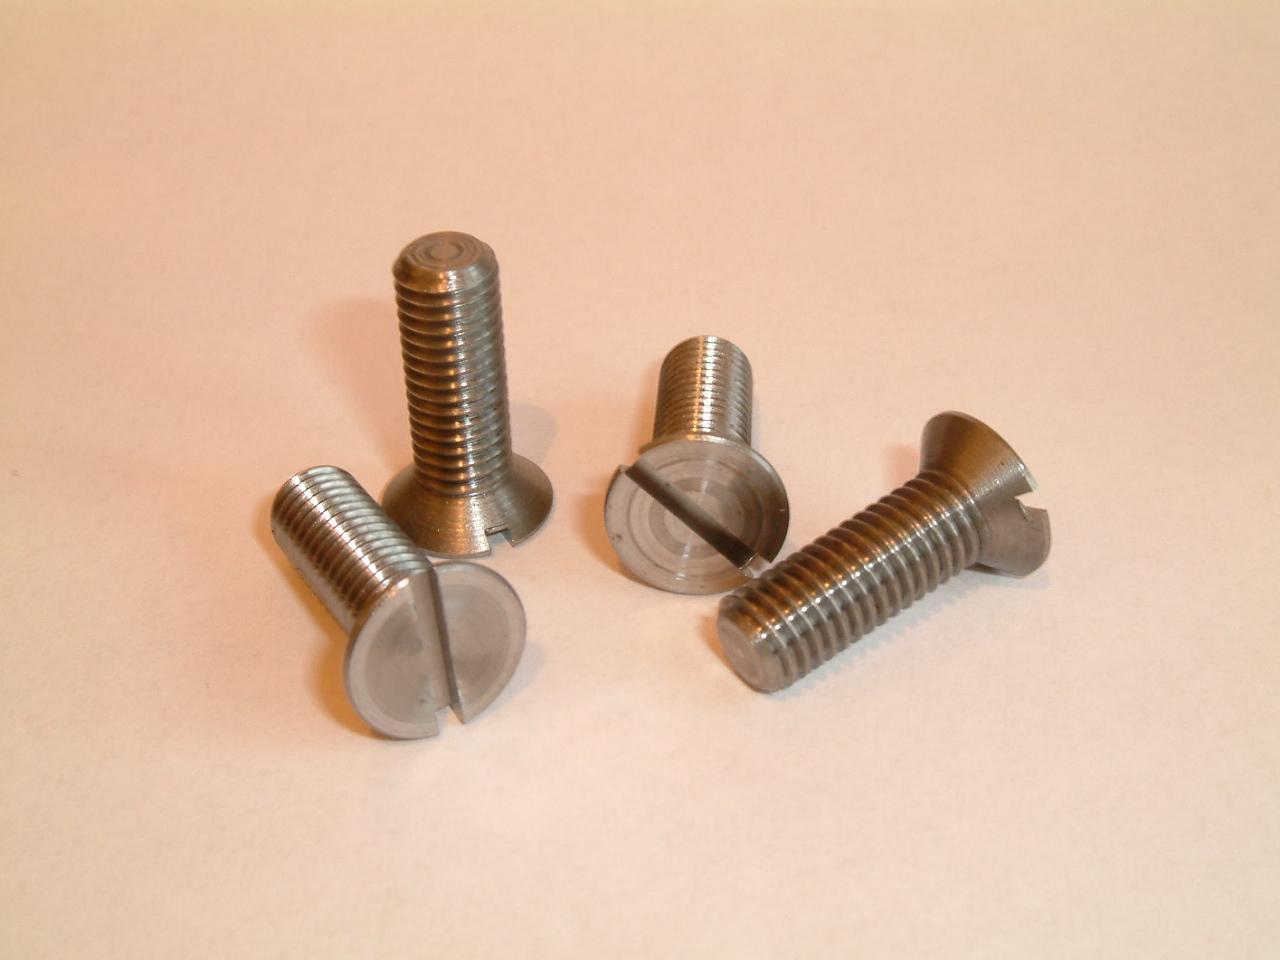 1.50" long. 1/4" BSW BRASS BOLTS SETS of 5 pcs--Hex head,100 bolts available